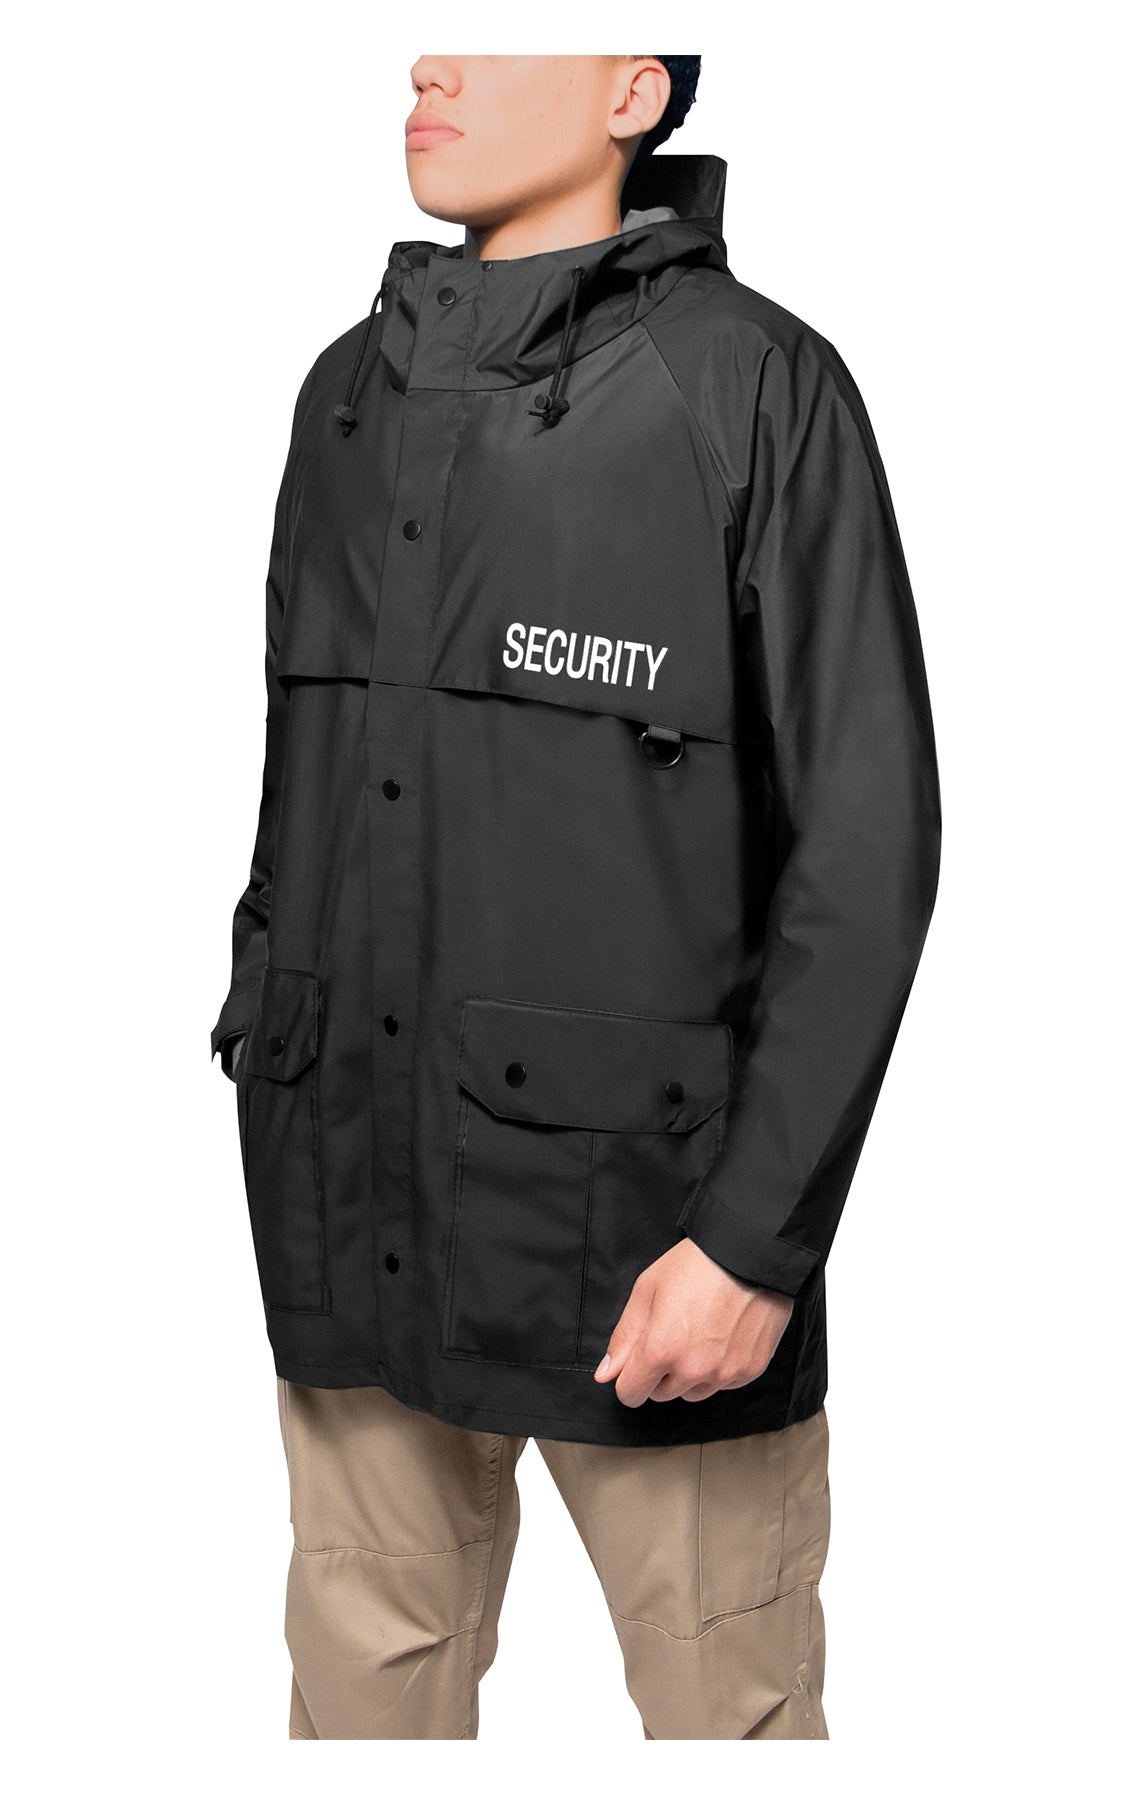 Rothco Lined Coaches Security Jacket